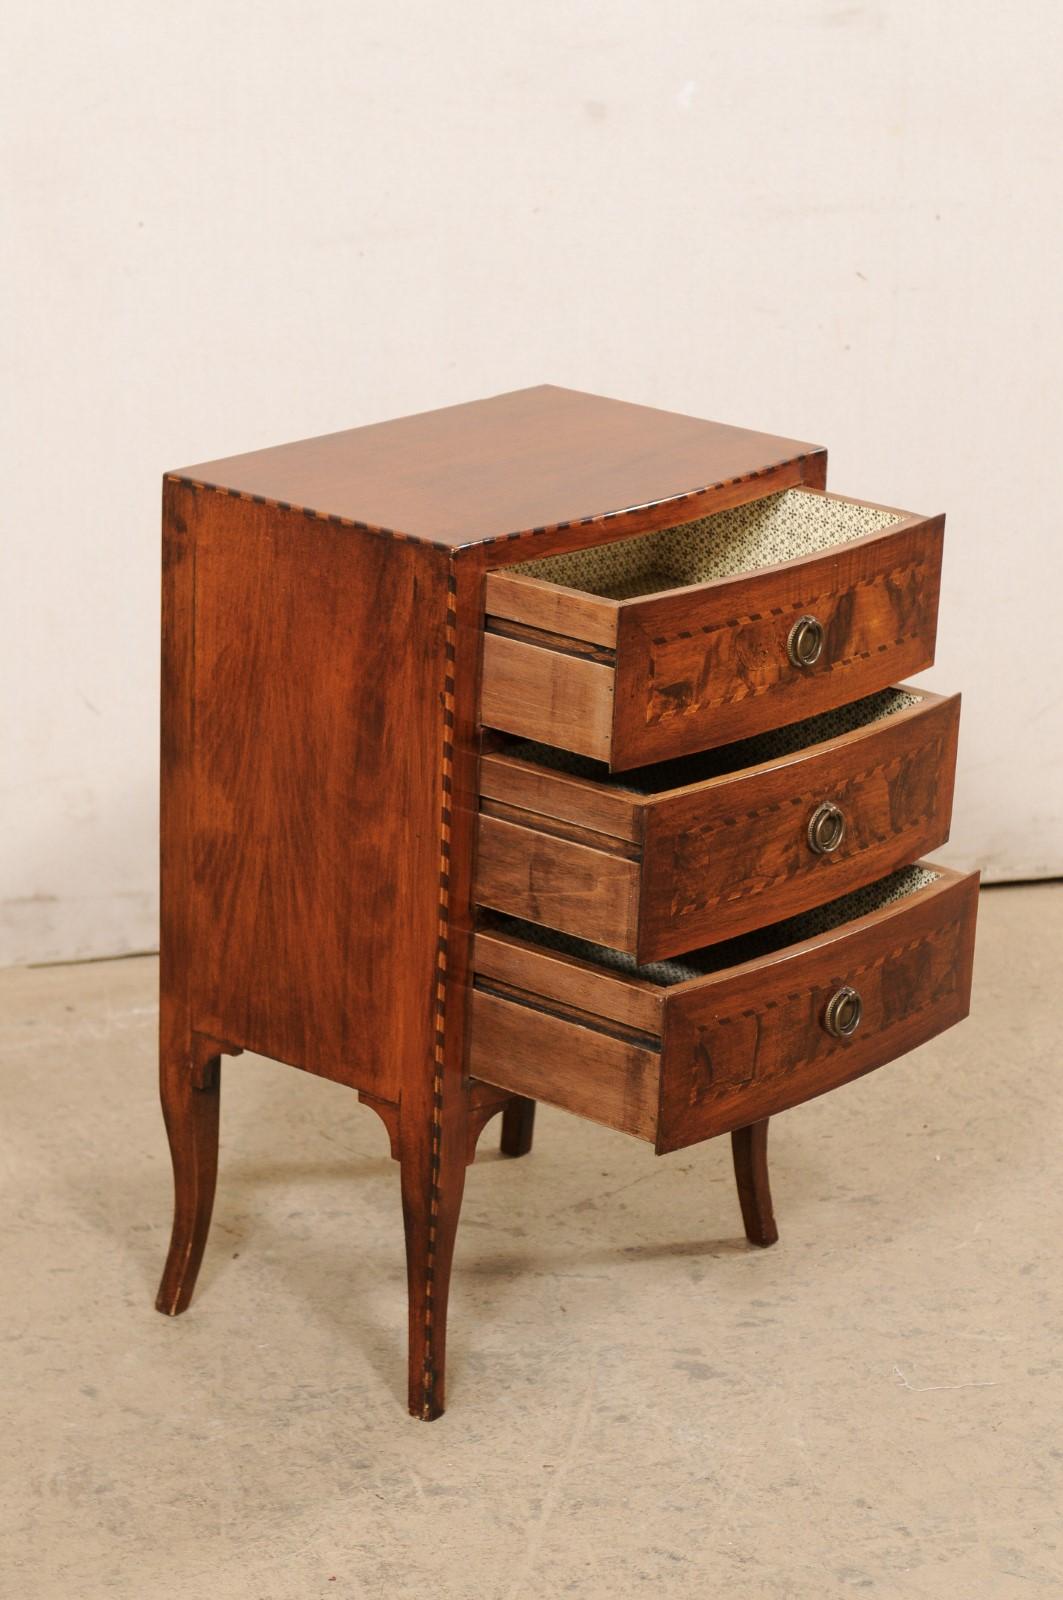 Small Italian Raised Side Chest of Drawers w/Roped Inlay Trimming, Mid-20th C For Sale 1